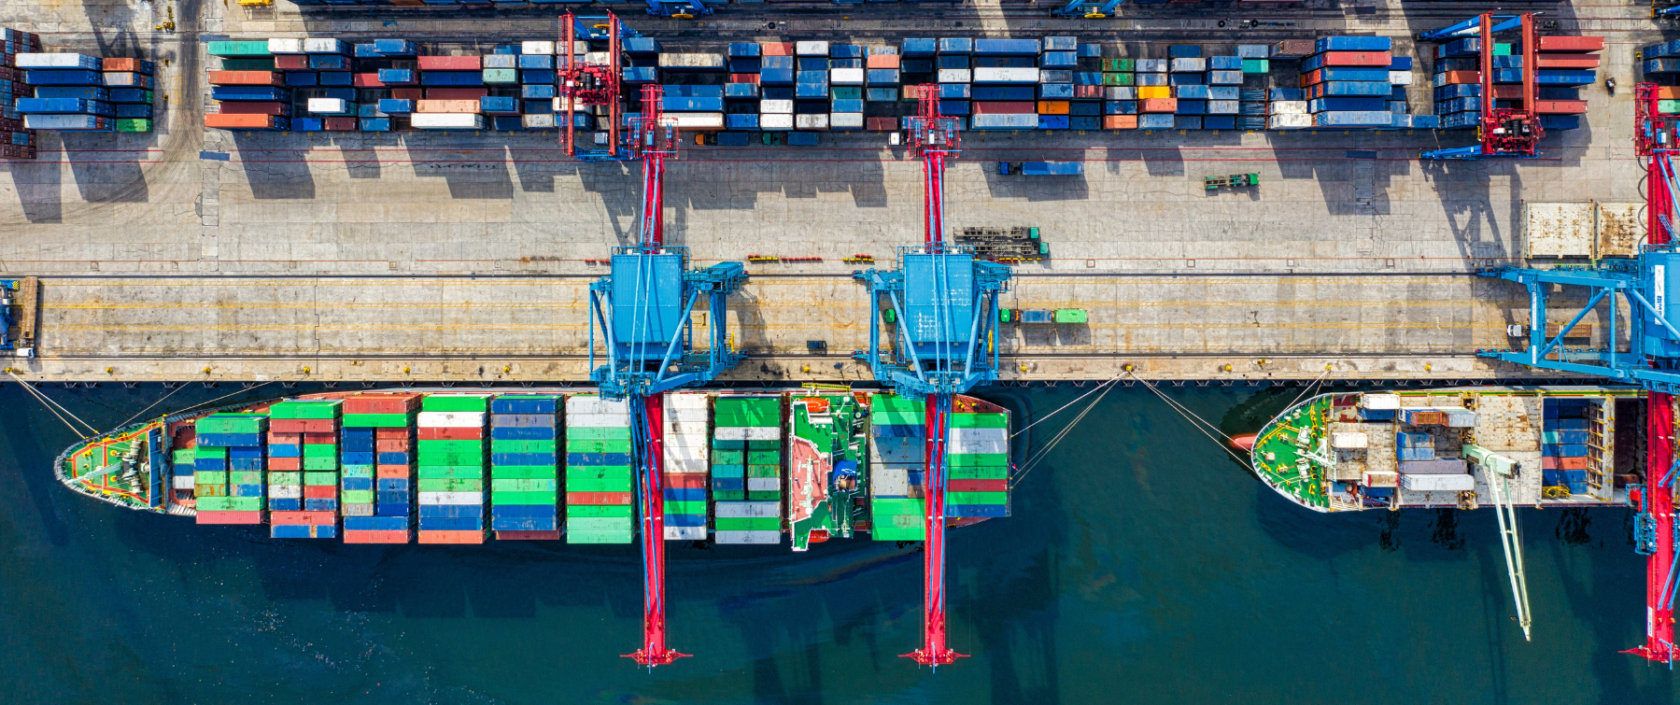 Photo of a dock where many cargo ships are being loaded with colorful shipping containers